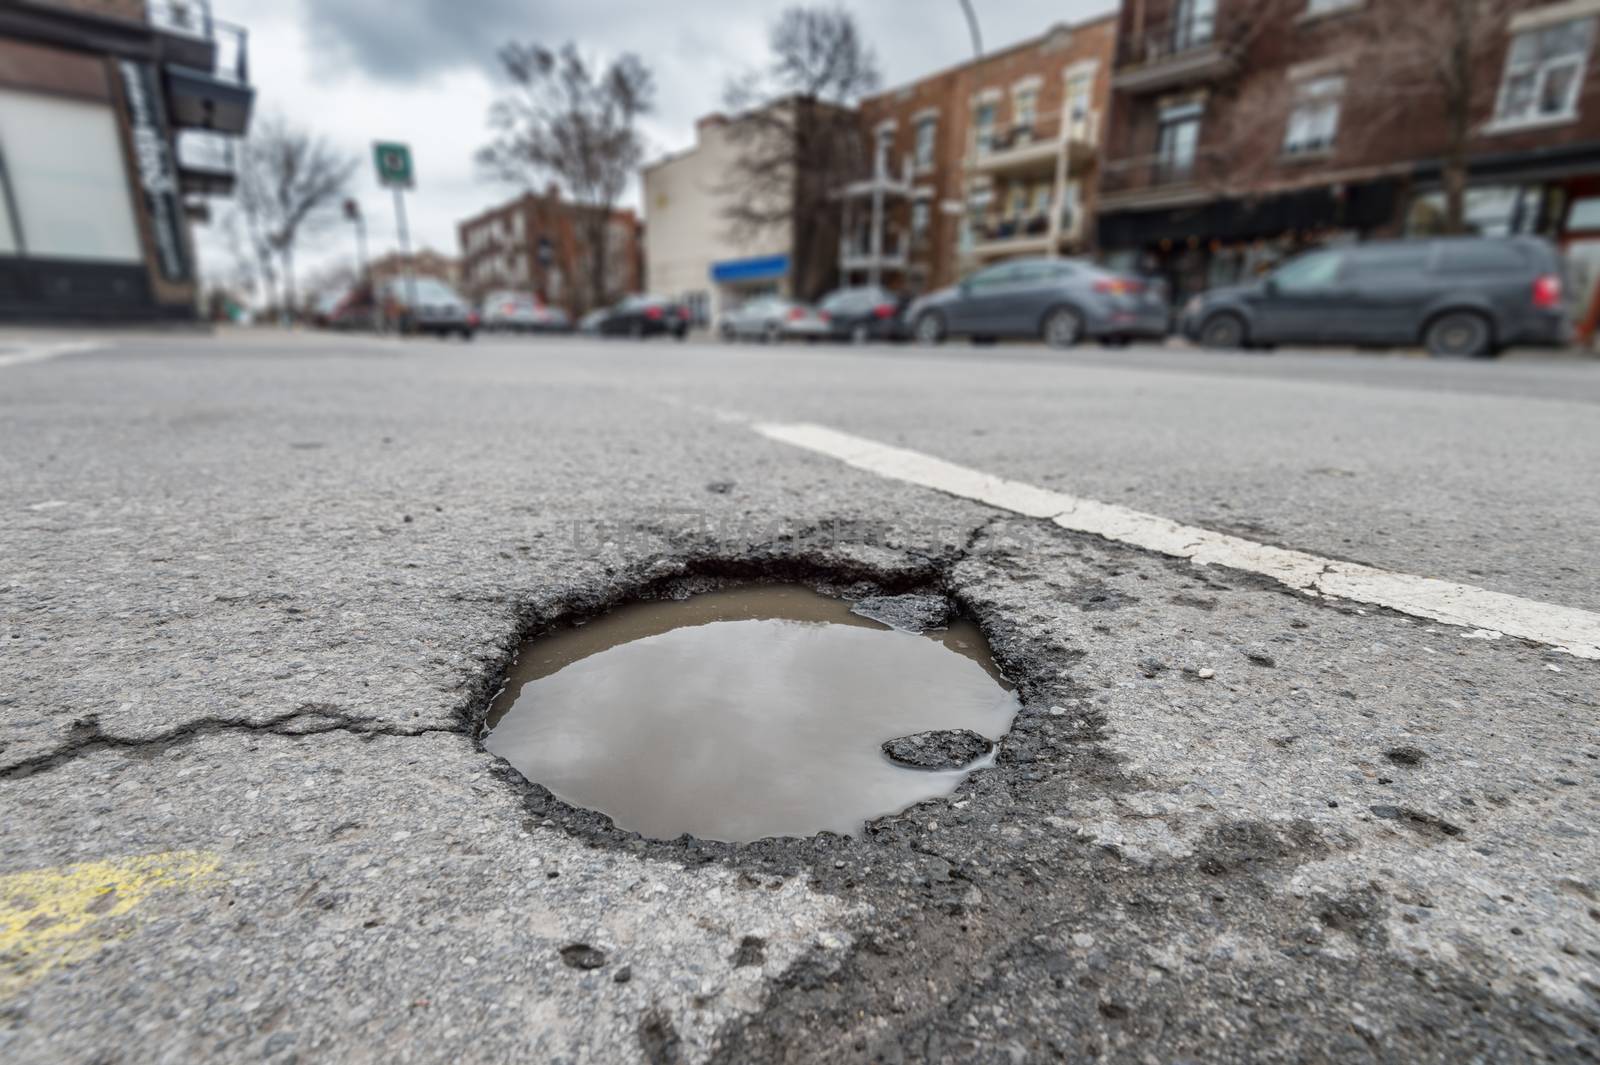 Large pothole on Papineau Avenue in Montreal, Canada (2018)